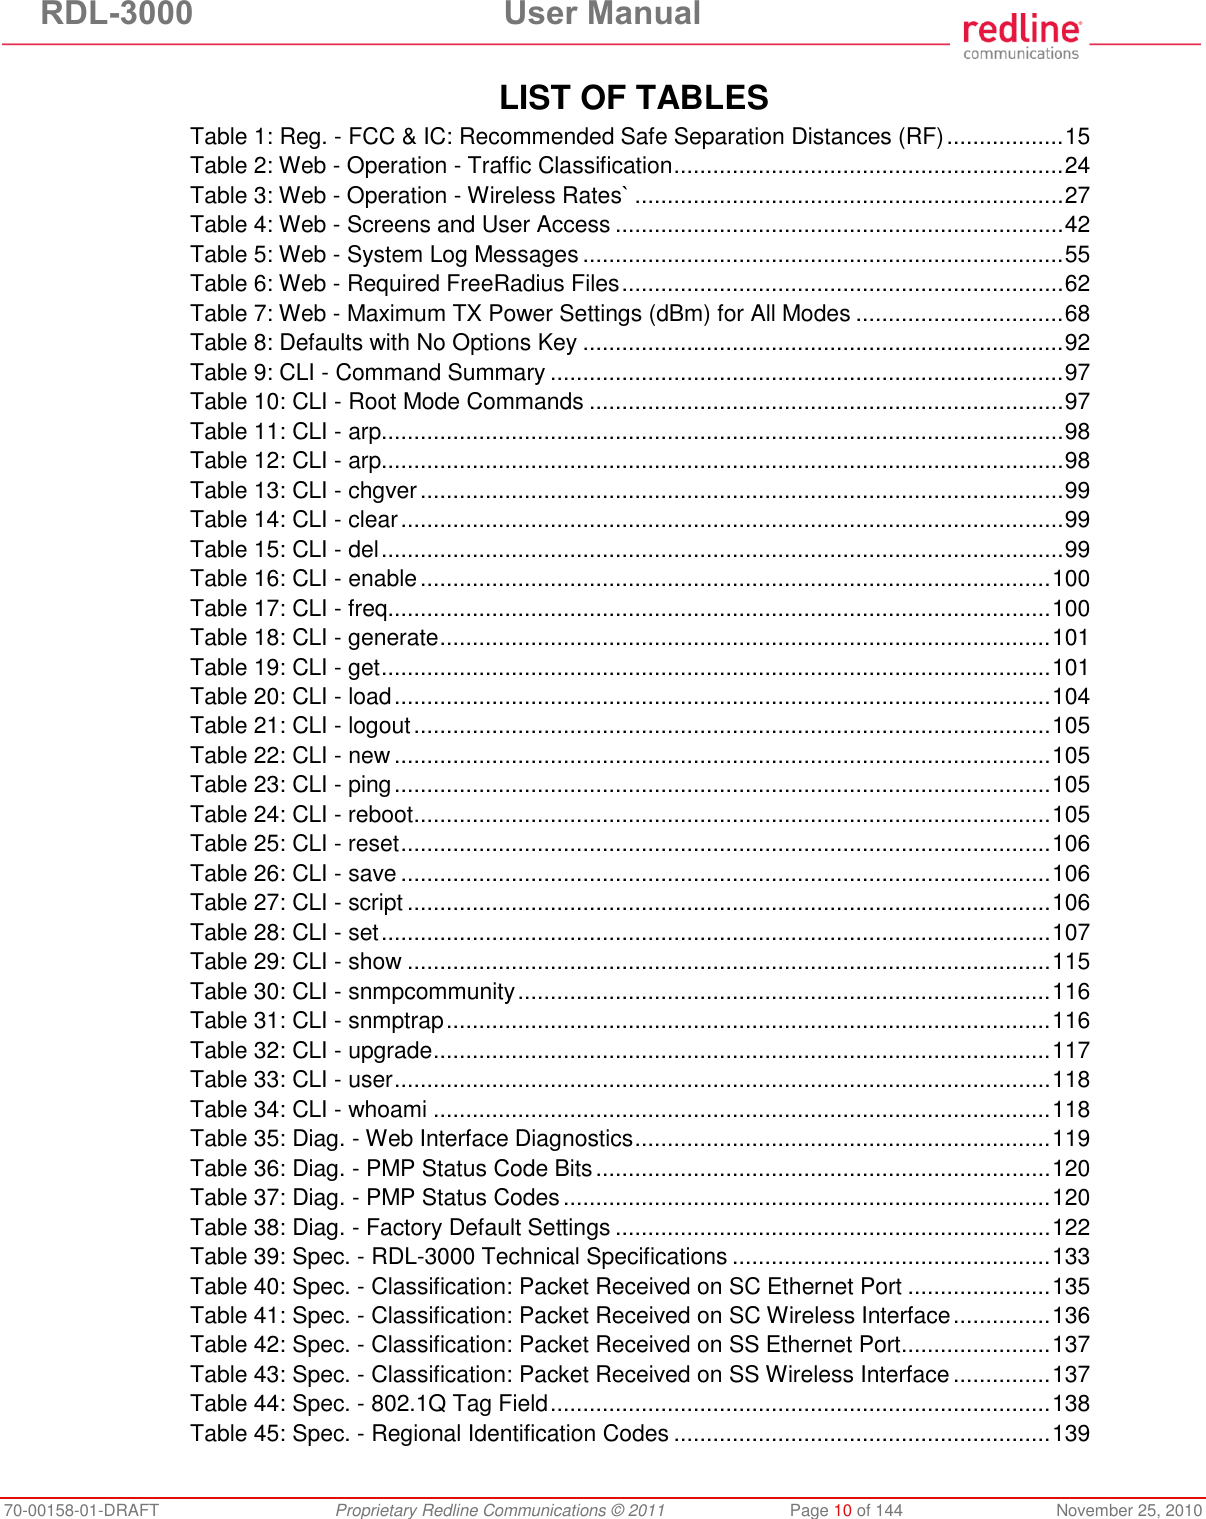 RDL-3000  User Manual 70-00158-01-DRAFT  Proprietary Redline Communications © 2011  Page 10 of 144  November 25, 2010  LIST OF TABLES Table 1: Reg. - FCC &amp; IC: Recommended Safe Separation Distances (RF) .................. 15 Table 2: Web - Operation - Traffic Classification ............................................................ 24 Table 3: Web - Operation - Wireless Rates` .................................................................. 27 Table 4: Web - Screens and User Access ..................................................................... 42 Table 5: Web - System Log Messages .......................................................................... 55 Table 6: Web - Required FreeRadius Files .................................................................... 62 Table 7: Web - Maximum TX Power Settings (dBm) for All Modes ................................ 68 Table 8: Defaults with No Options Key .......................................................................... 92 Table 9: CLI - Command Summary ............................................................................... 97 Table 10: CLI - Root Mode Commands ......................................................................... 97 Table 11: CLI - arp......................................................................................................... 98 Table 12: CLI - arp......................................................................................................... 98 Table 13: CLI - chgver ................................................................................................... 99 Table 14: CLI - clear ...................................................................................................... 99 Table 15: CLI - del ......................................................................................................... 99 Table 16: CLI - enable ................................................................................................. 100 Table 17: CLI - freq...................................................................................................... 100 Table 18: CLI - generate .............................................................................................. 101 Table 19: CLI - get ....................................................................................................... 101 Table 20: CLI - load ..................................................................................................... 104 Table 21: CLI - logout .................................................................................................. 105 Table 22: CLI - new ..................................................................................................... 105 Table 23: CLI - ping ..................................................................................................... 105 Table 24: CLI - reboot .................................................................................................. 105 Table 25: CLI - reset .................................................................................................... 106 Table 26: CLI - save .................................................................................................... 106 Table 27: CLI - script ................................................................................................... 106 Table 28: CLI - set ....................................................................................................... 107 Table 29: CLI - show ................................................................................................... 115 Table 30: CLI - snmpcommunity .................................................................................. 116 Table 31: CLI - snmptrap ............................................................................................. 116 Table 32: CLI - upgrade ............................................................................................... 117 Table 33: CLI - user ..................................................................................................... 118 Table 34: CLI - whoami ............................................................................................... 118 Table 35: Diag. - Web Interface Diagnostics ................................................................ 119 Table 36: Diag. - PMP Status Code Bits ...................................................................... 120 Table 37: Diag. - PMP Status Codes ........................................................................... 120 Table 38: Diag. - Factory Default Settings ................................................................... 122 Table 39: Spec. - RDL-3000 Technical Specifications ................................................. 133 Table 40: Spec. - Classification: Packet Received on SC Ethernet Port ...................... 135 Table 41: Spec. - Classification: Packet Received on SC Wireless Interface ............... 136 Table 42: Spec. - Classification: Packet Received on SS Ethernet Port ....................... 137 Table 43: Spec. - Classification: Packet Received on SS Wireless Interface ............... 137 Table 44: Spec. - 802.1Q Tag Field ............................................................................. 138 Table 45: Spec. - Regional Identification Codes .......................................................... 139 